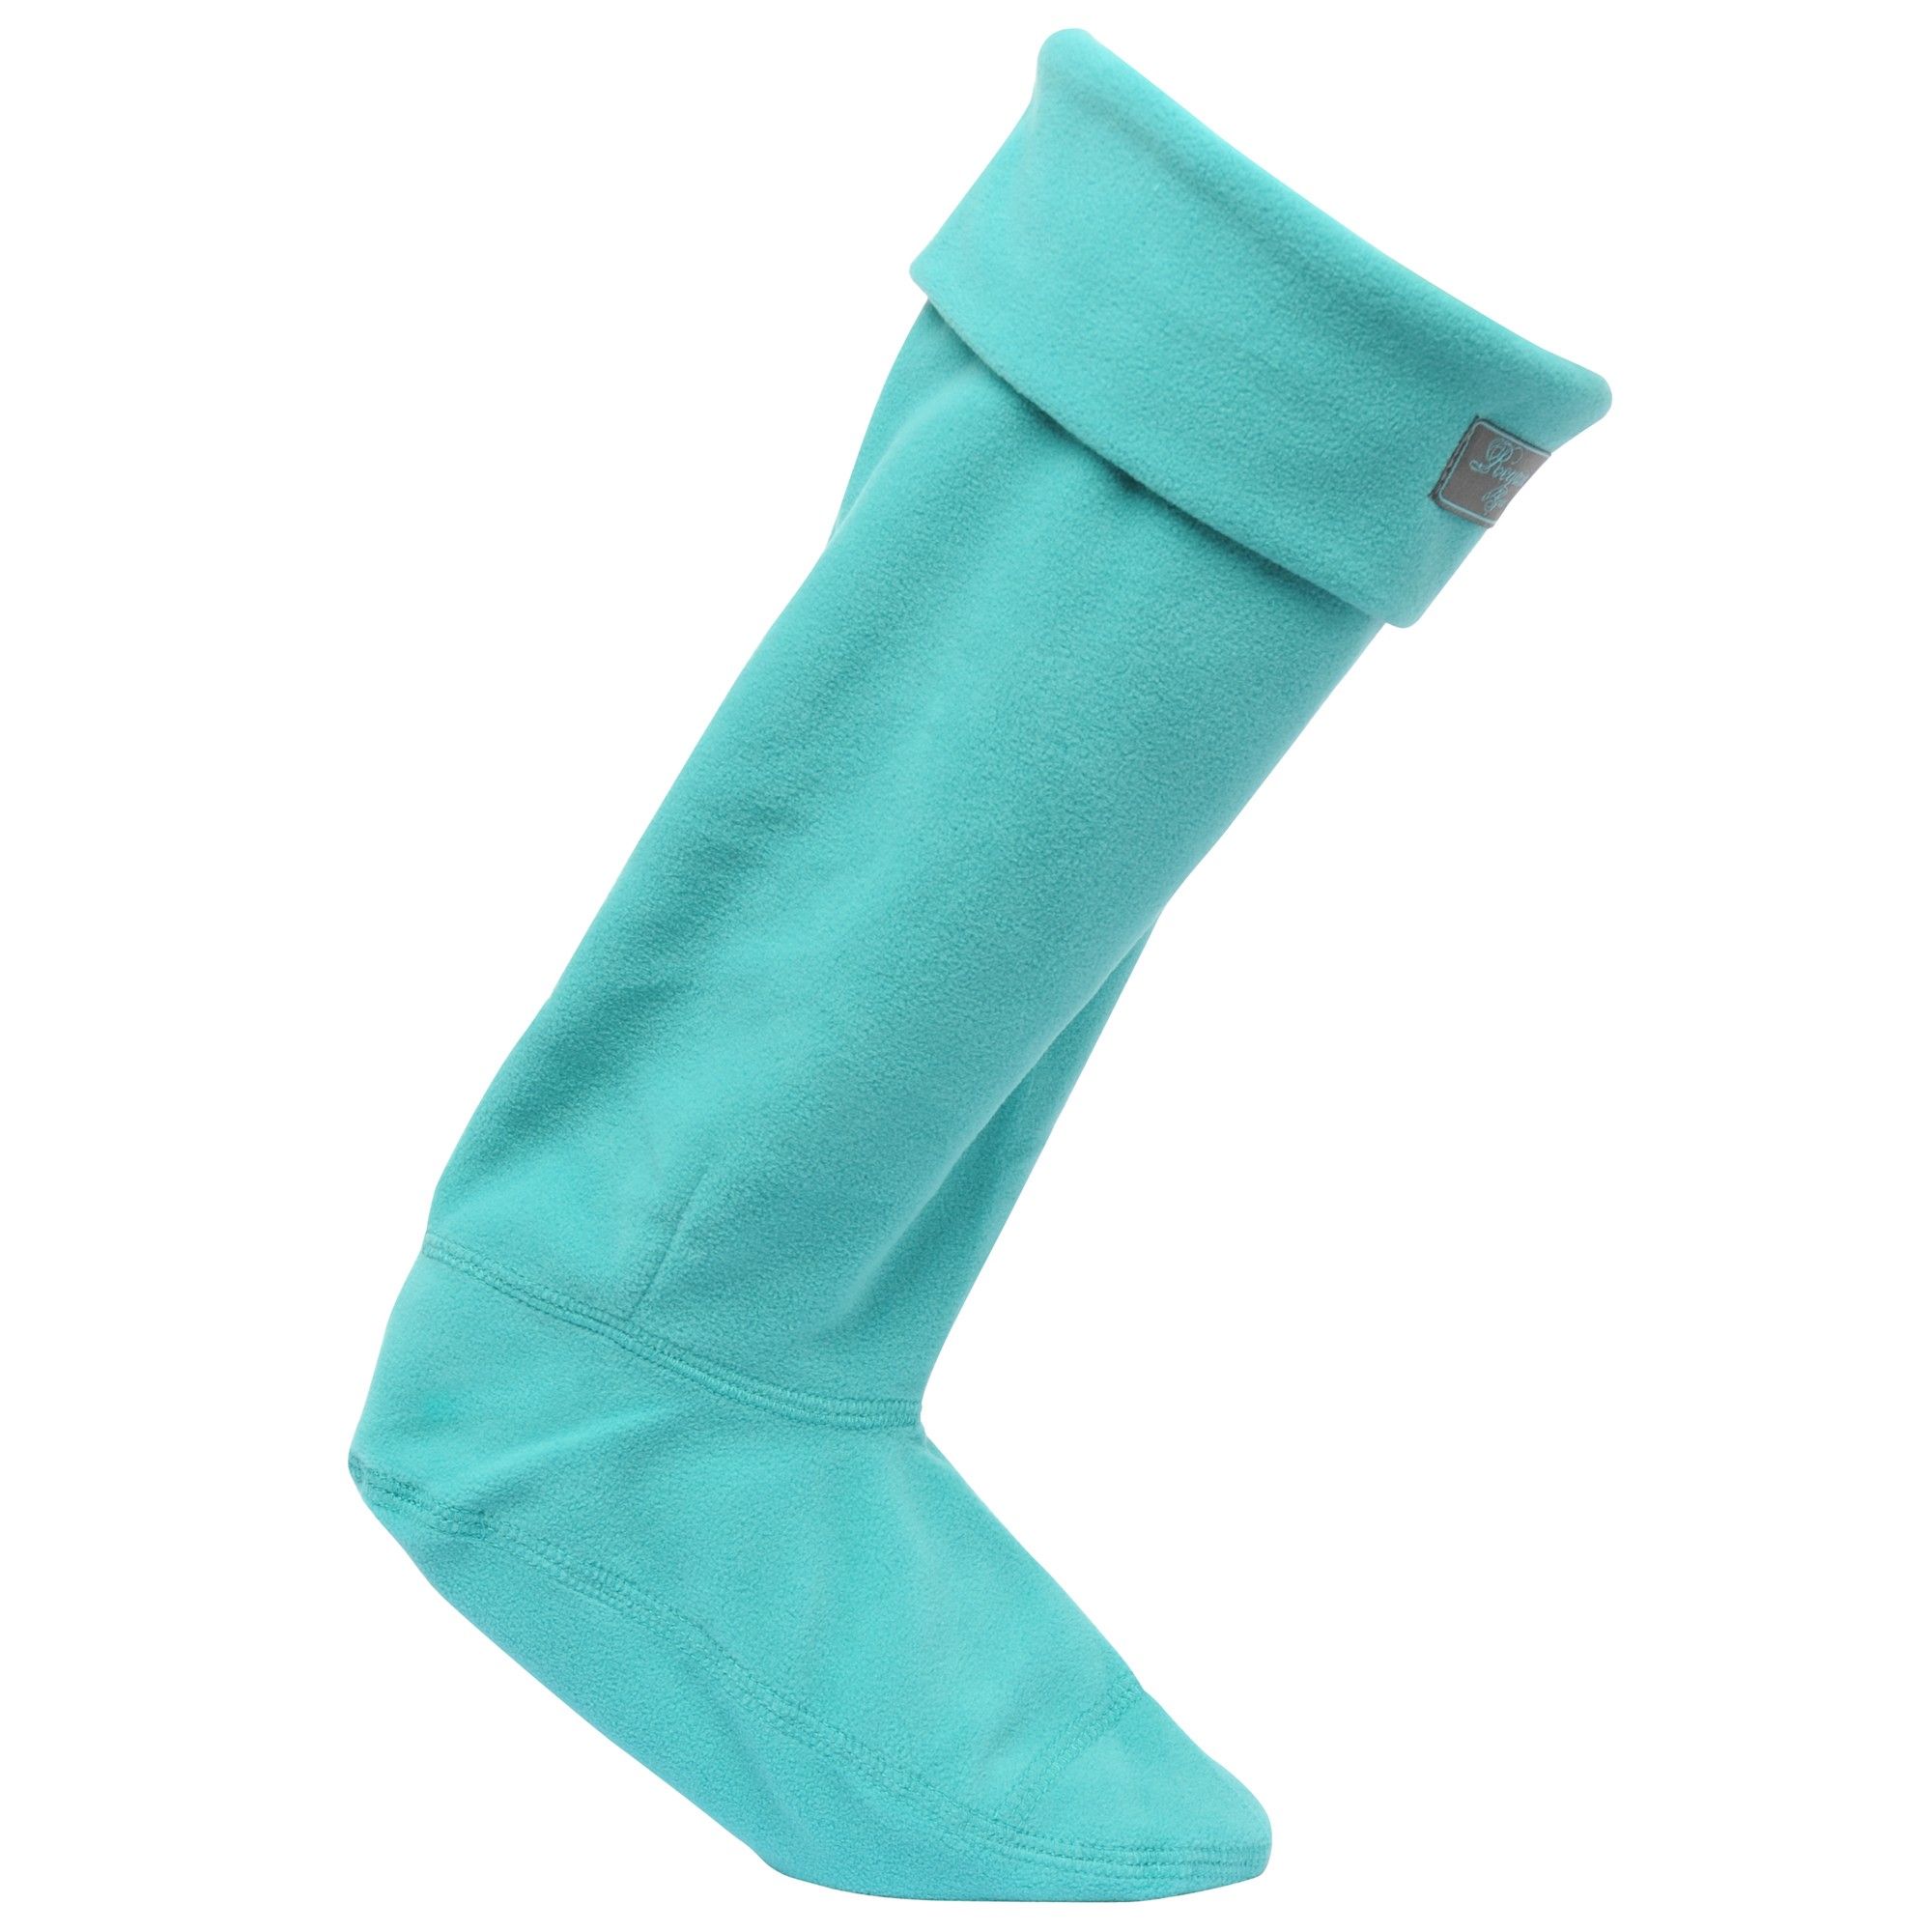 The Fleece Wellington Sock acts as a super warm cosy liner in the colder months. Keep them in your boots by the door for winter comfort walking the dog, doing the garden or muddy walks. 5% Elastodien 15% Polyamide 40% Cotton 40% Polyester.